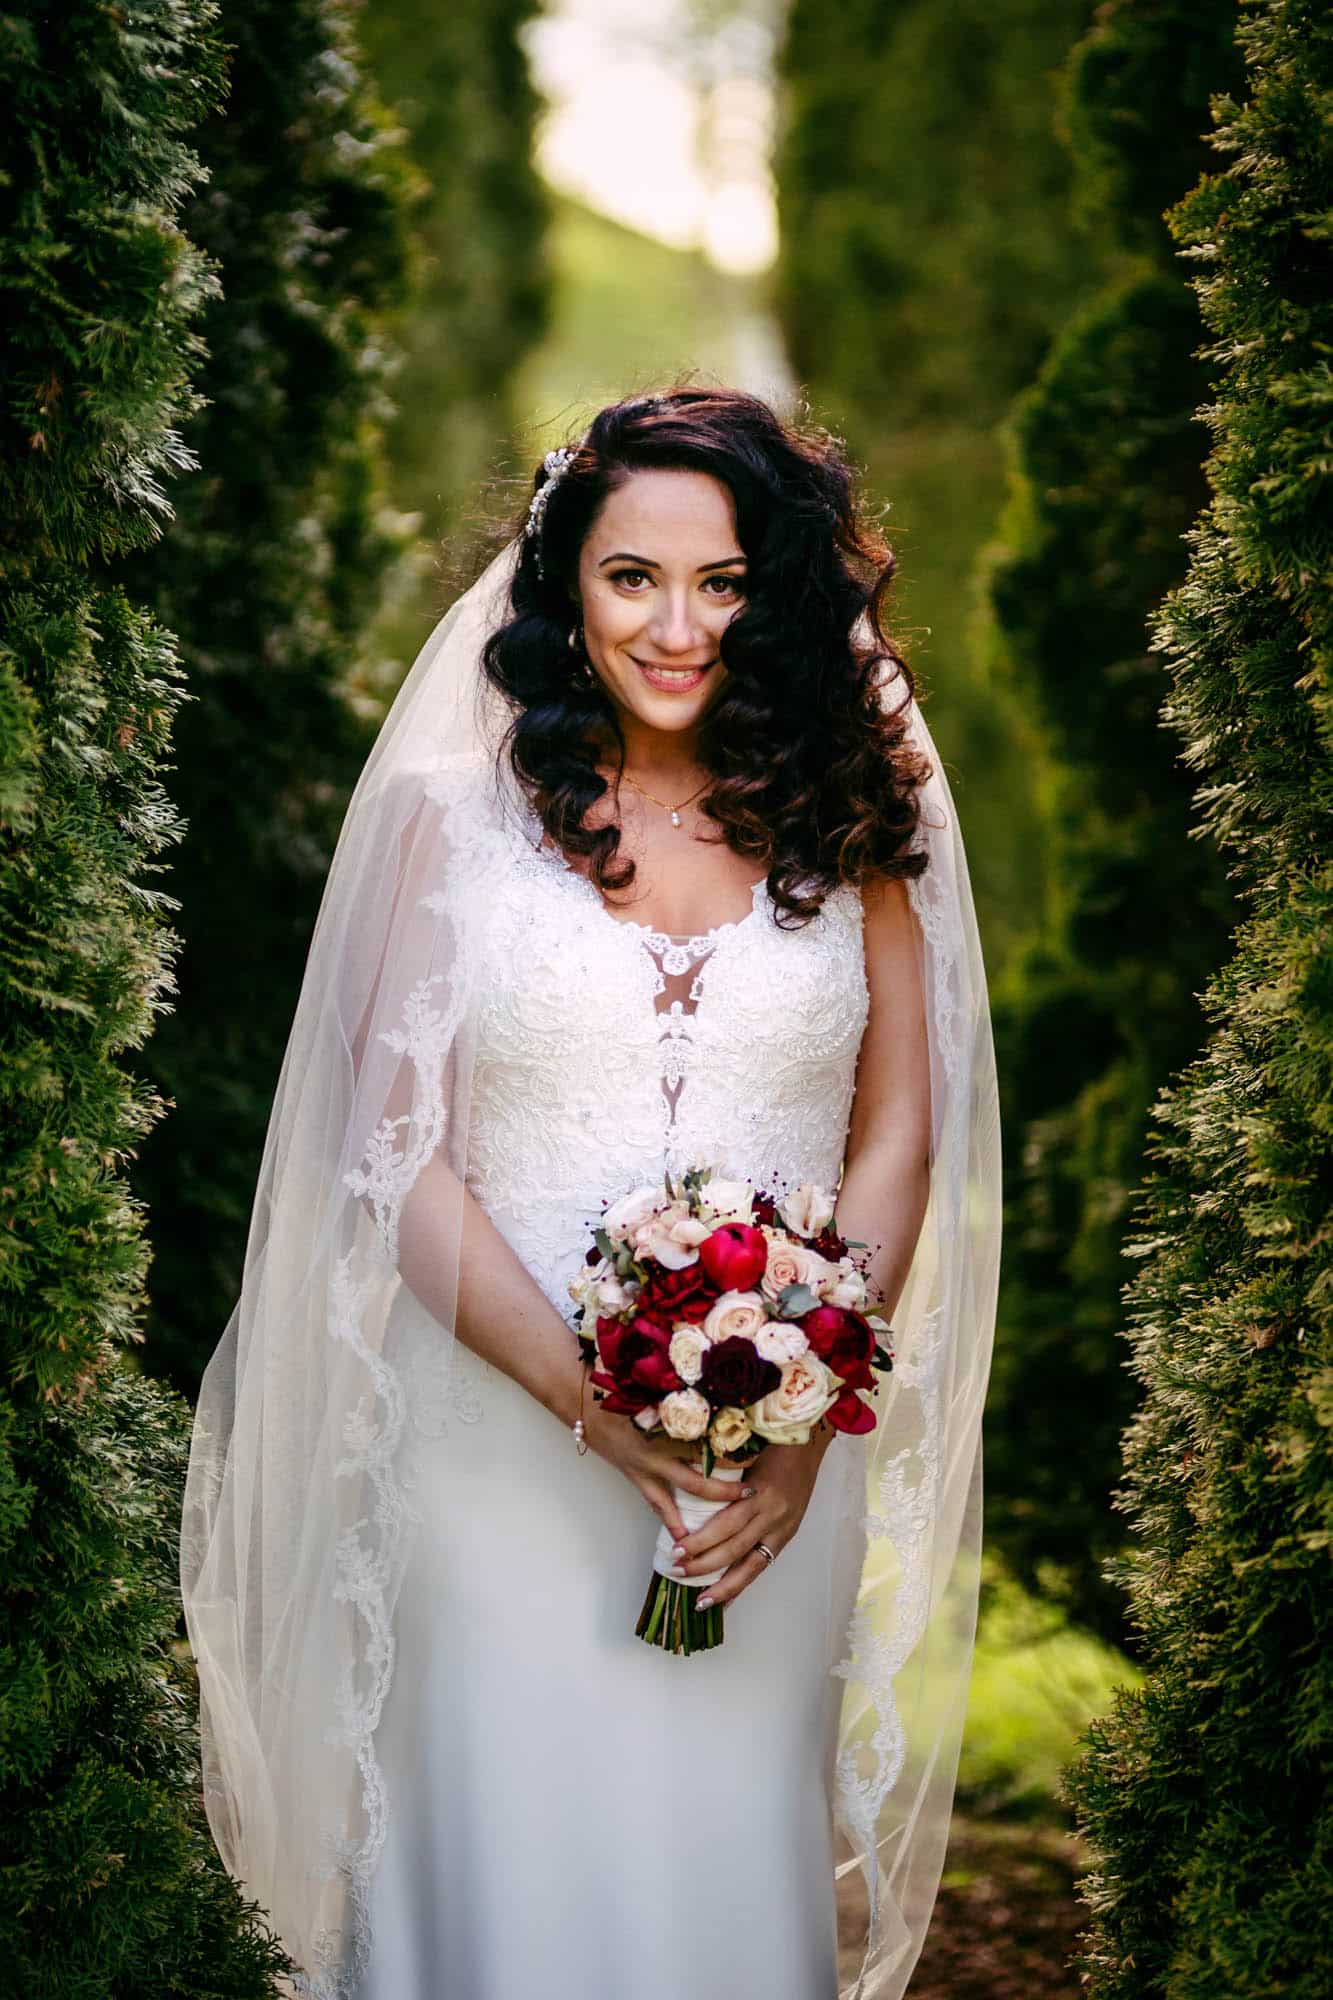 A bride in a wedding dress stands in a grove of trees.